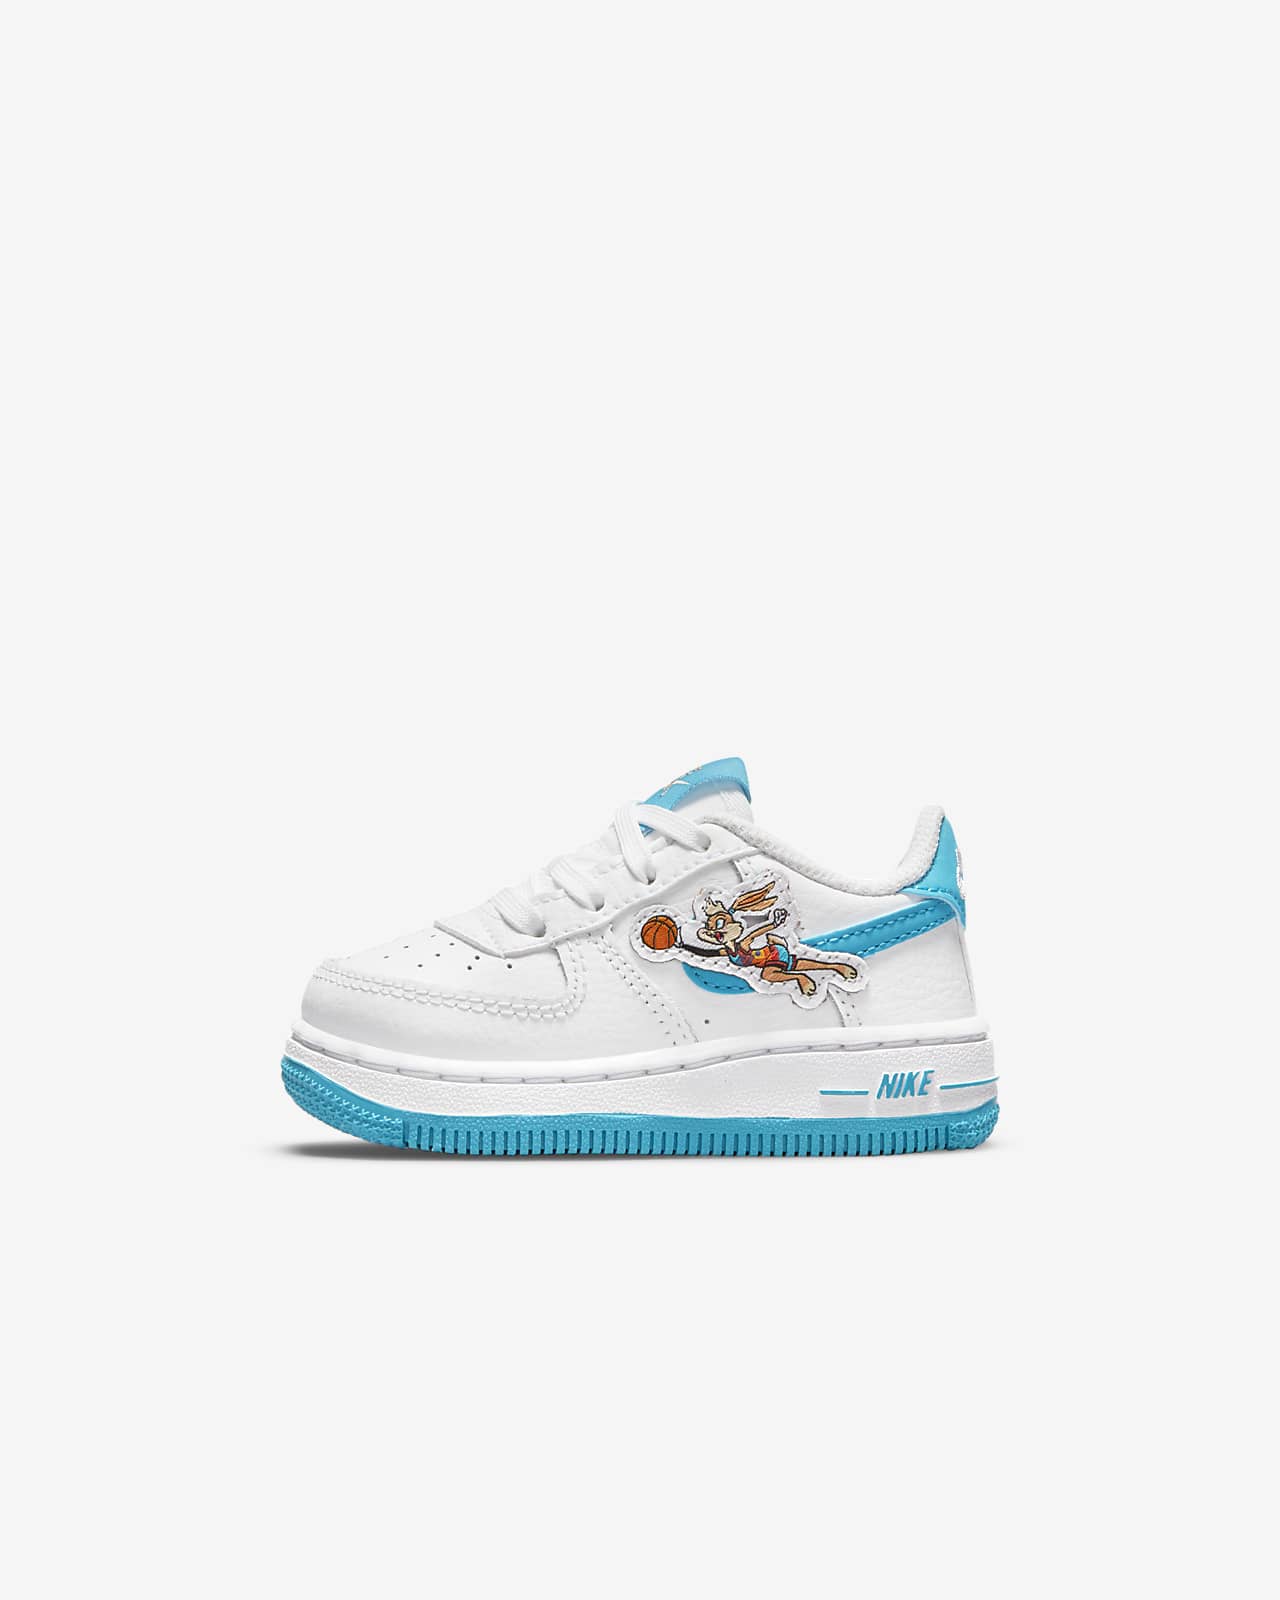 Nike Force 1 '06 x Space Jam: A New Legacy 嬰幼兒鞋款